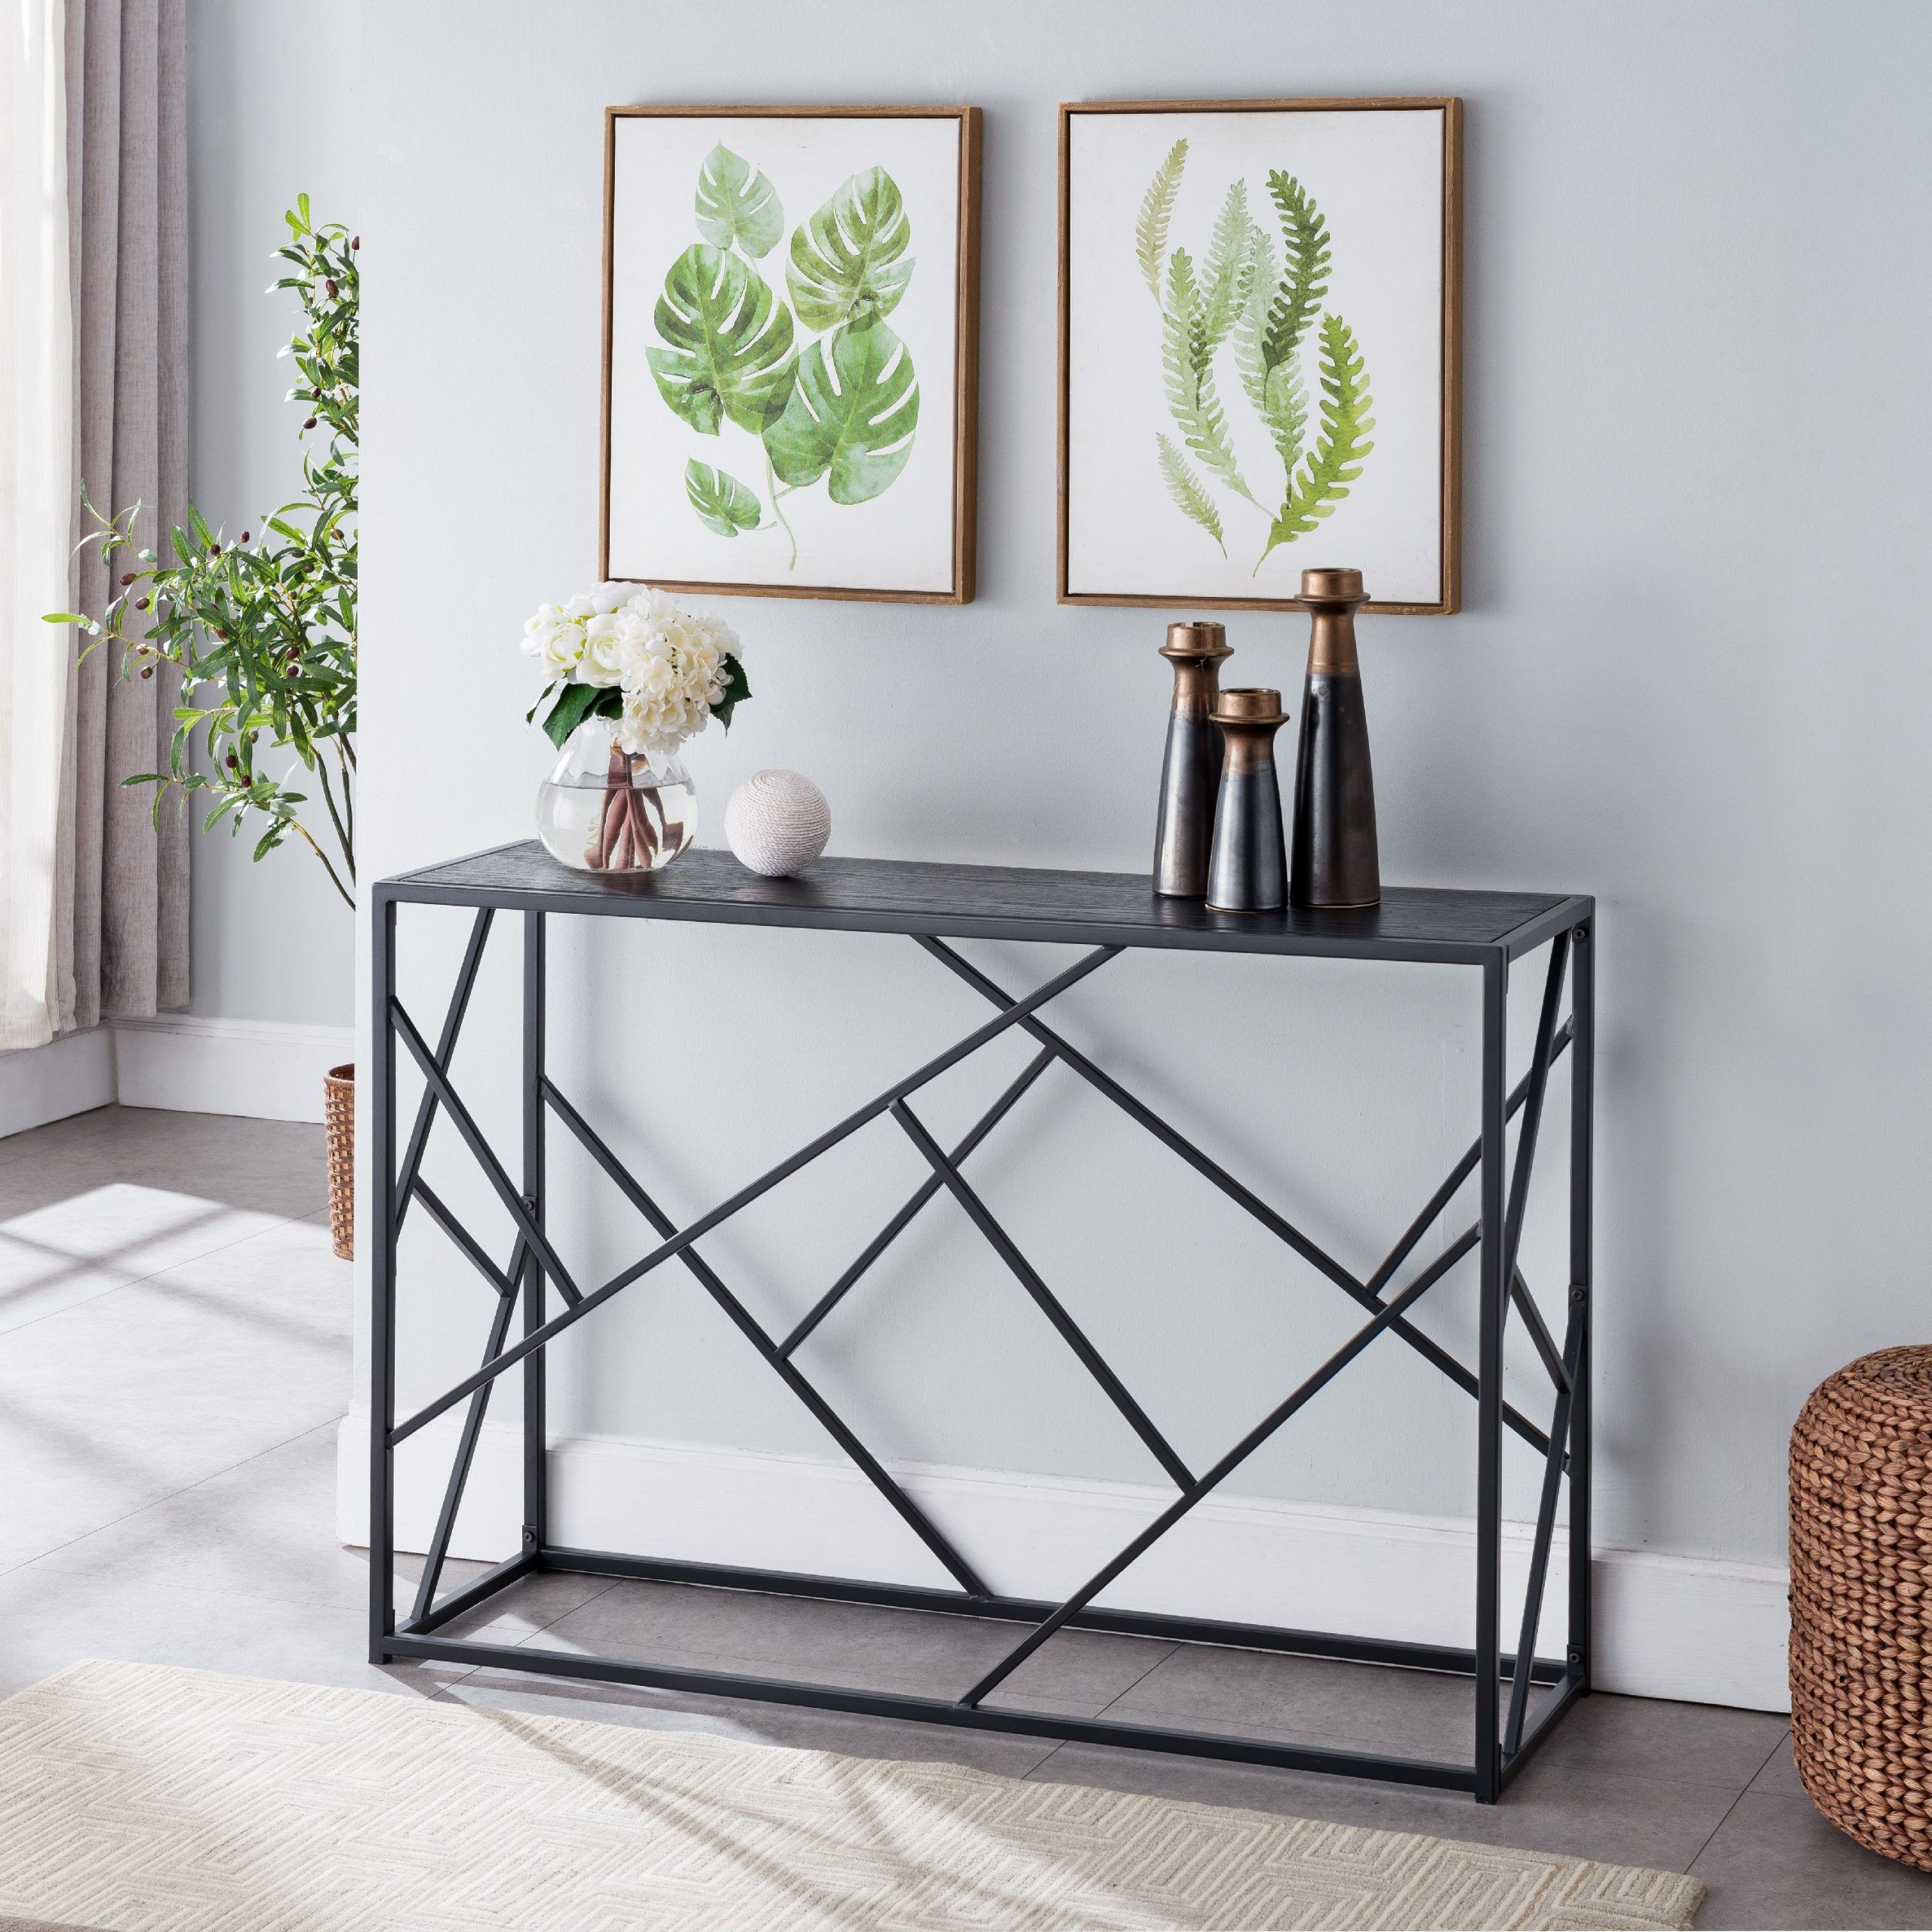 Thurl Modern Entryway Console Sofa Table, Black Metal Throughout Square Modern Console Tables (View 4 of 20)